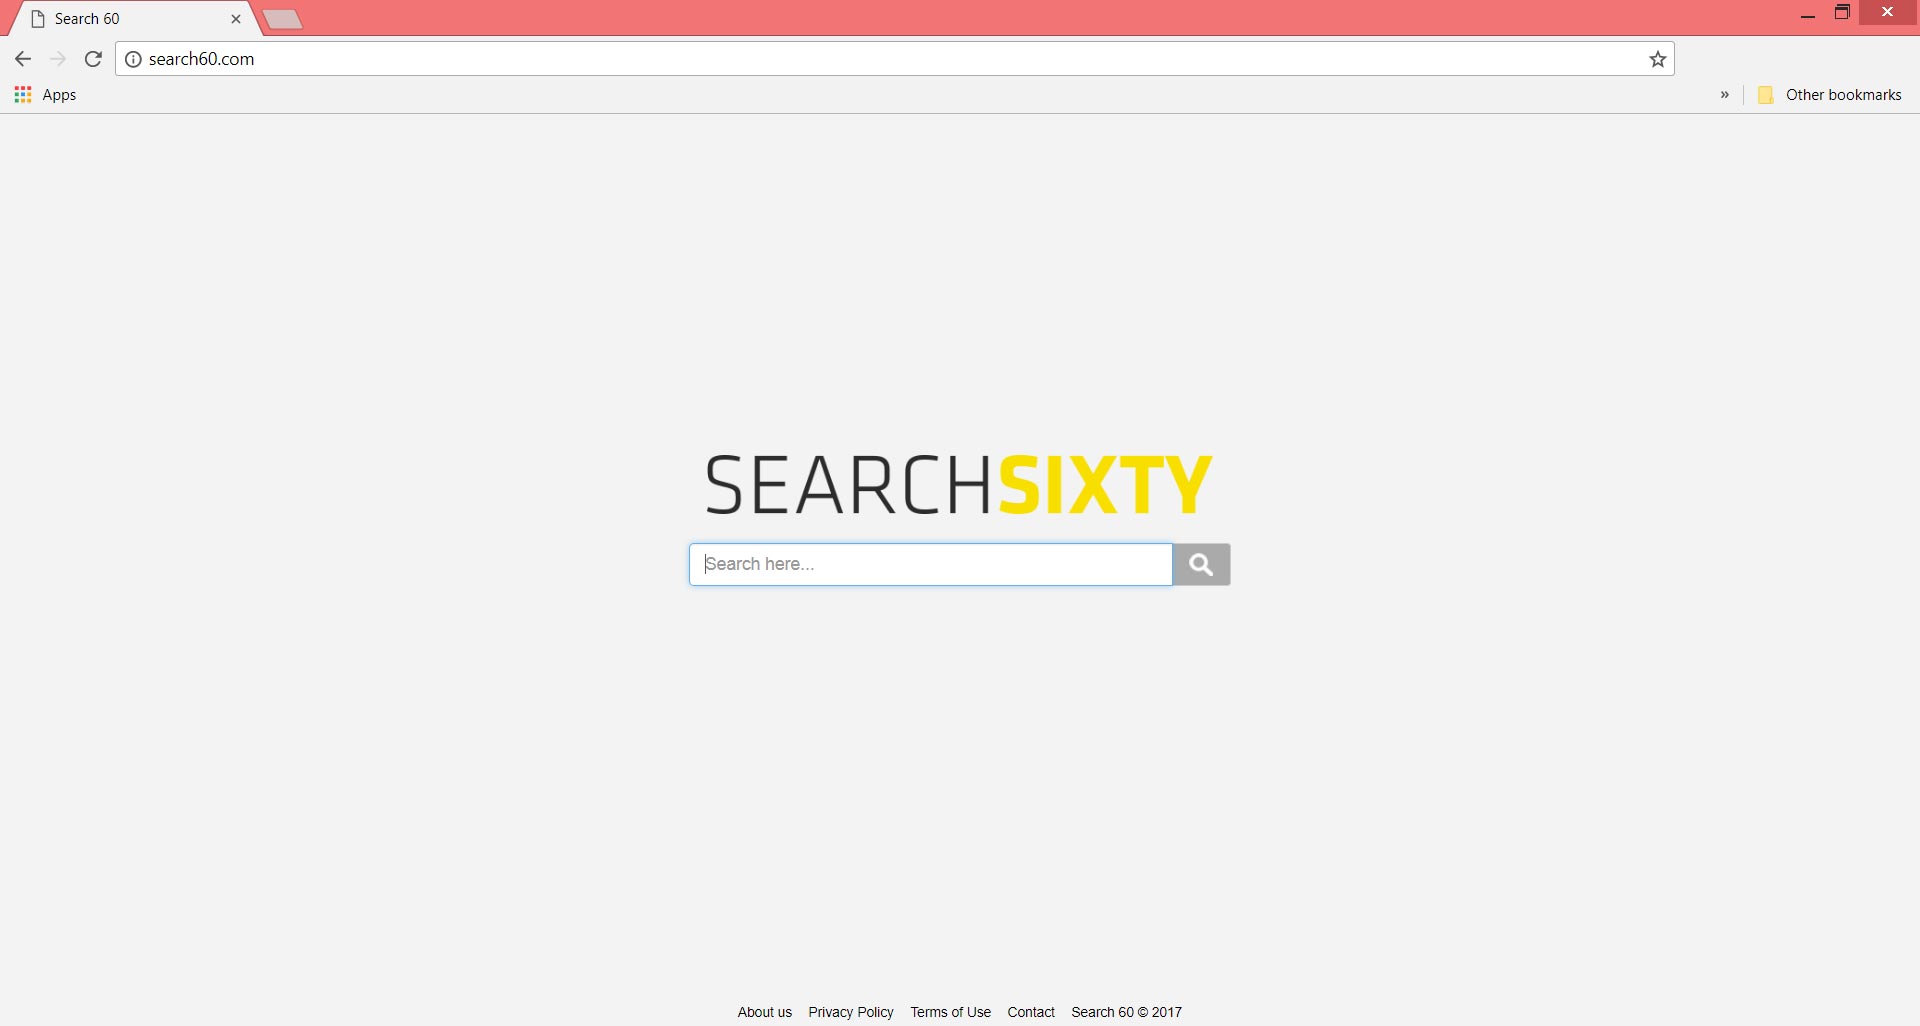 search60.com search sixty browser hijacker homepage removal guide sensorstechforum